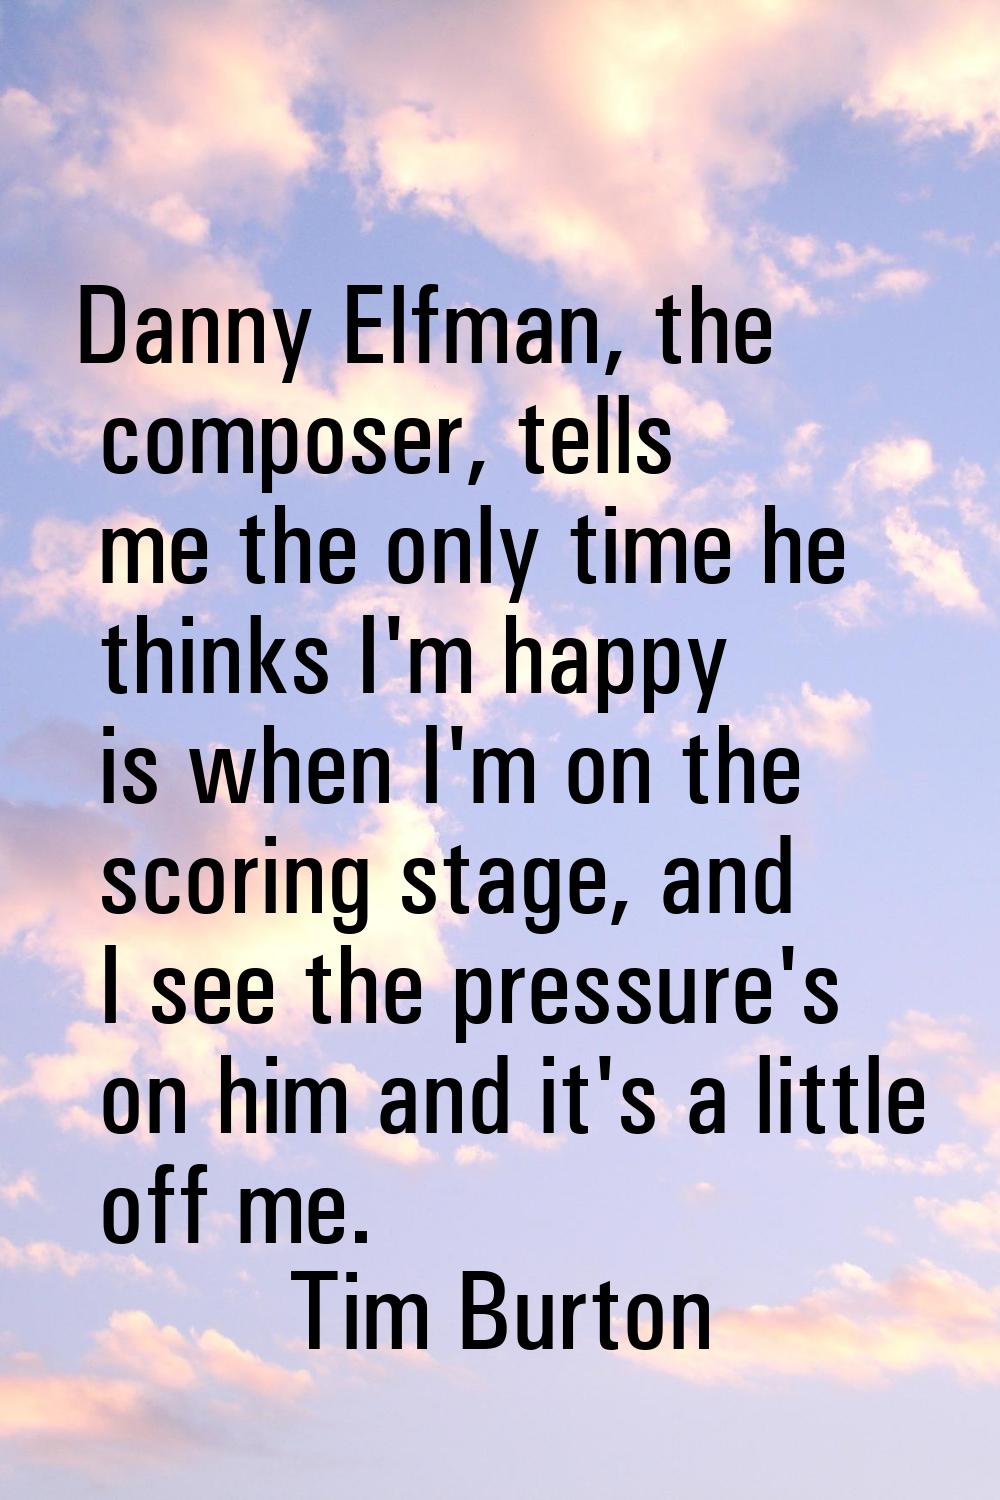 Danny Elfman, the composer, tells me the only time he thinks I'm happy is when I'm on the scoring s